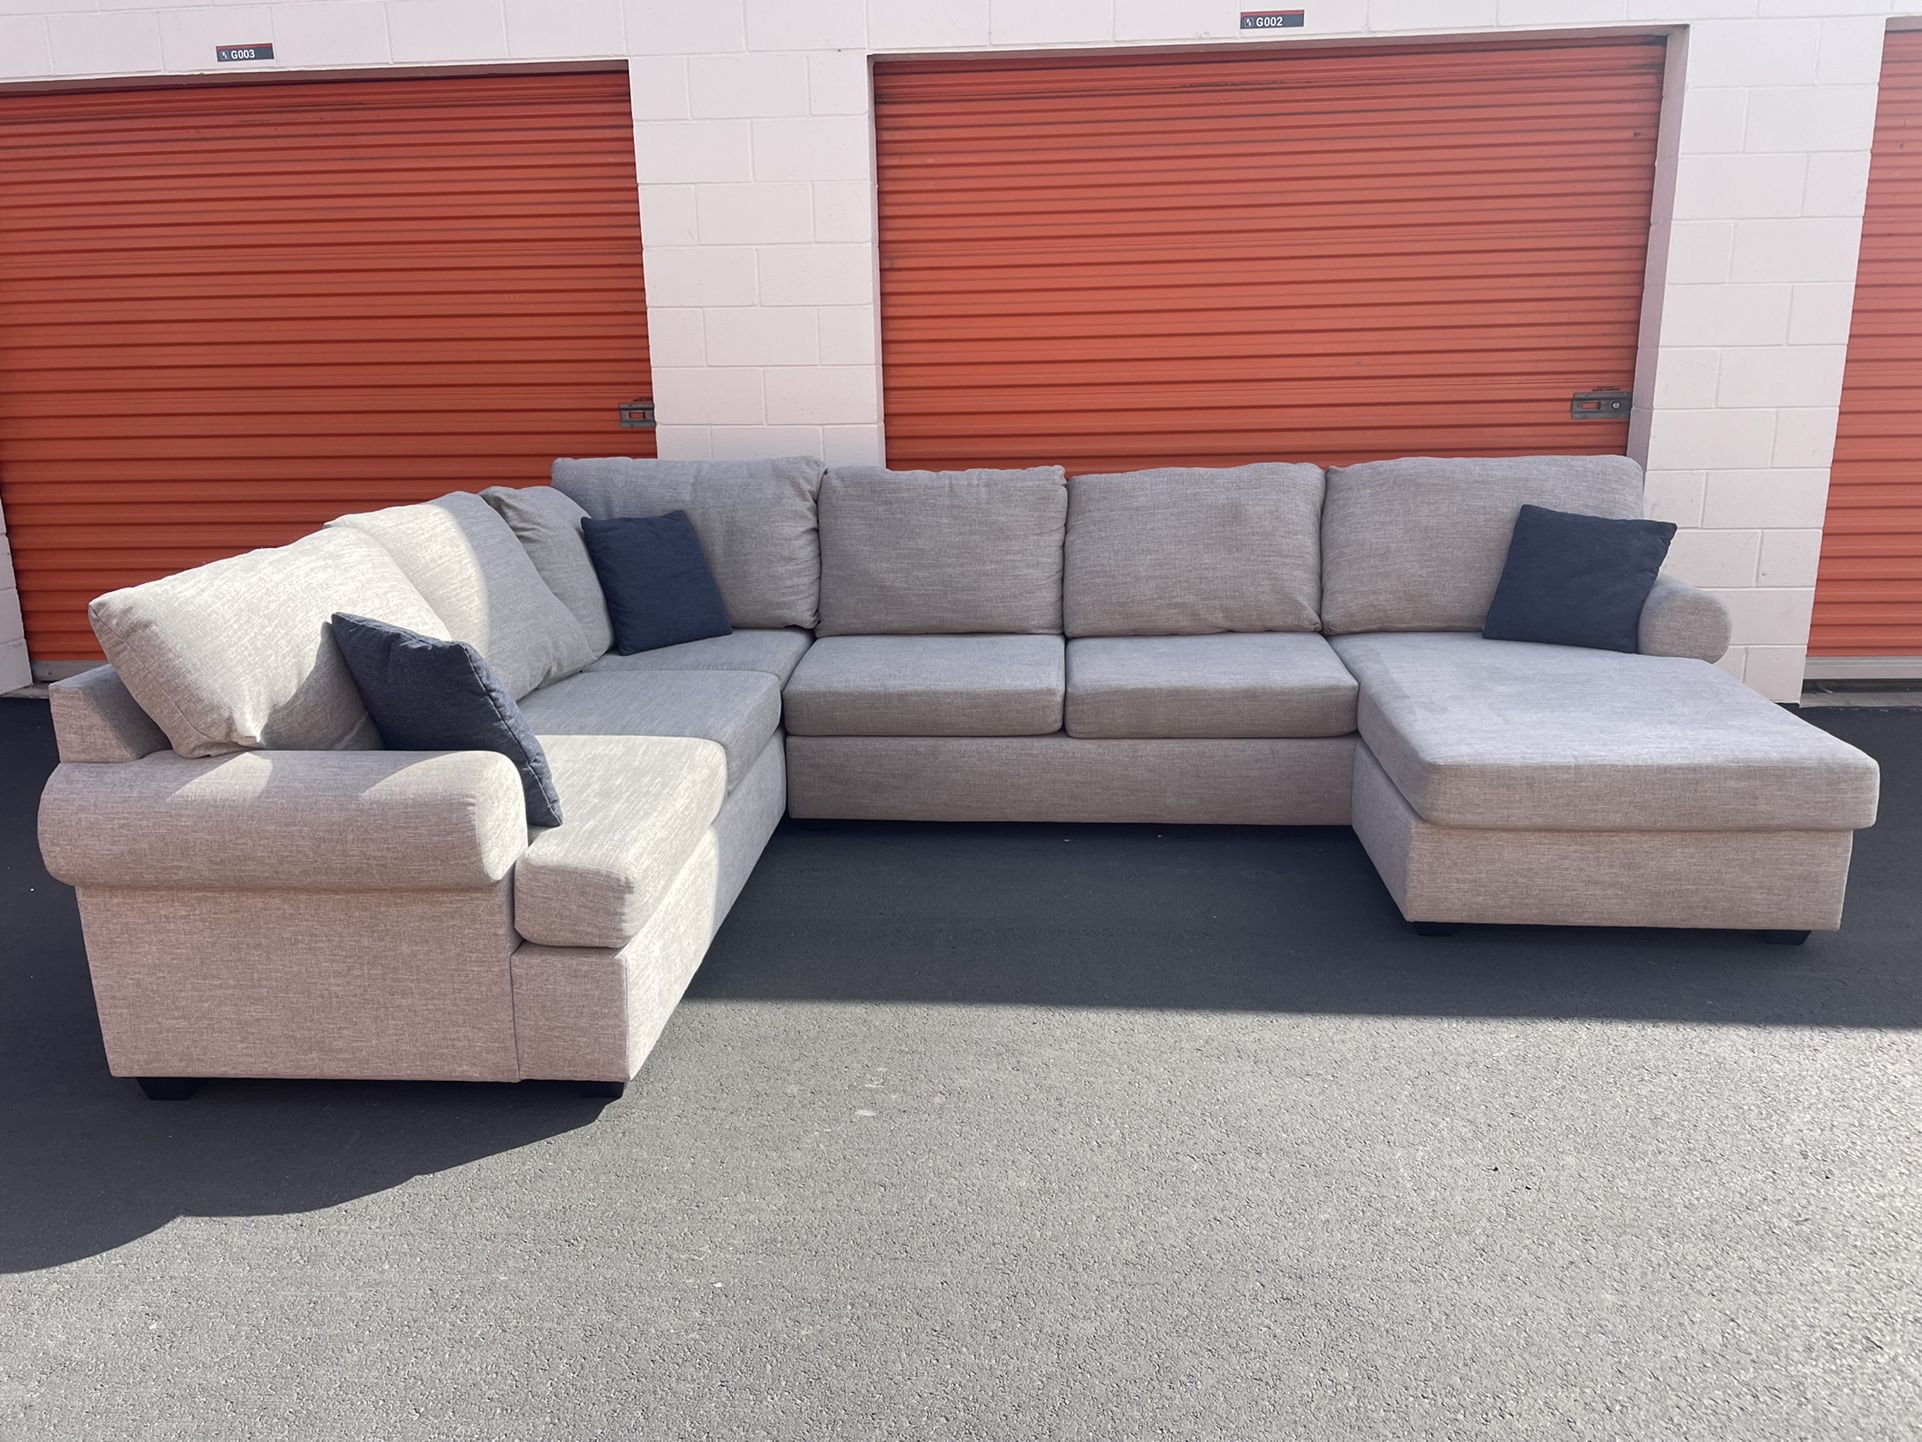 FREE DELIVERY!!! Beautiful Gray LIVING SPACES 3 piece sectional with chase